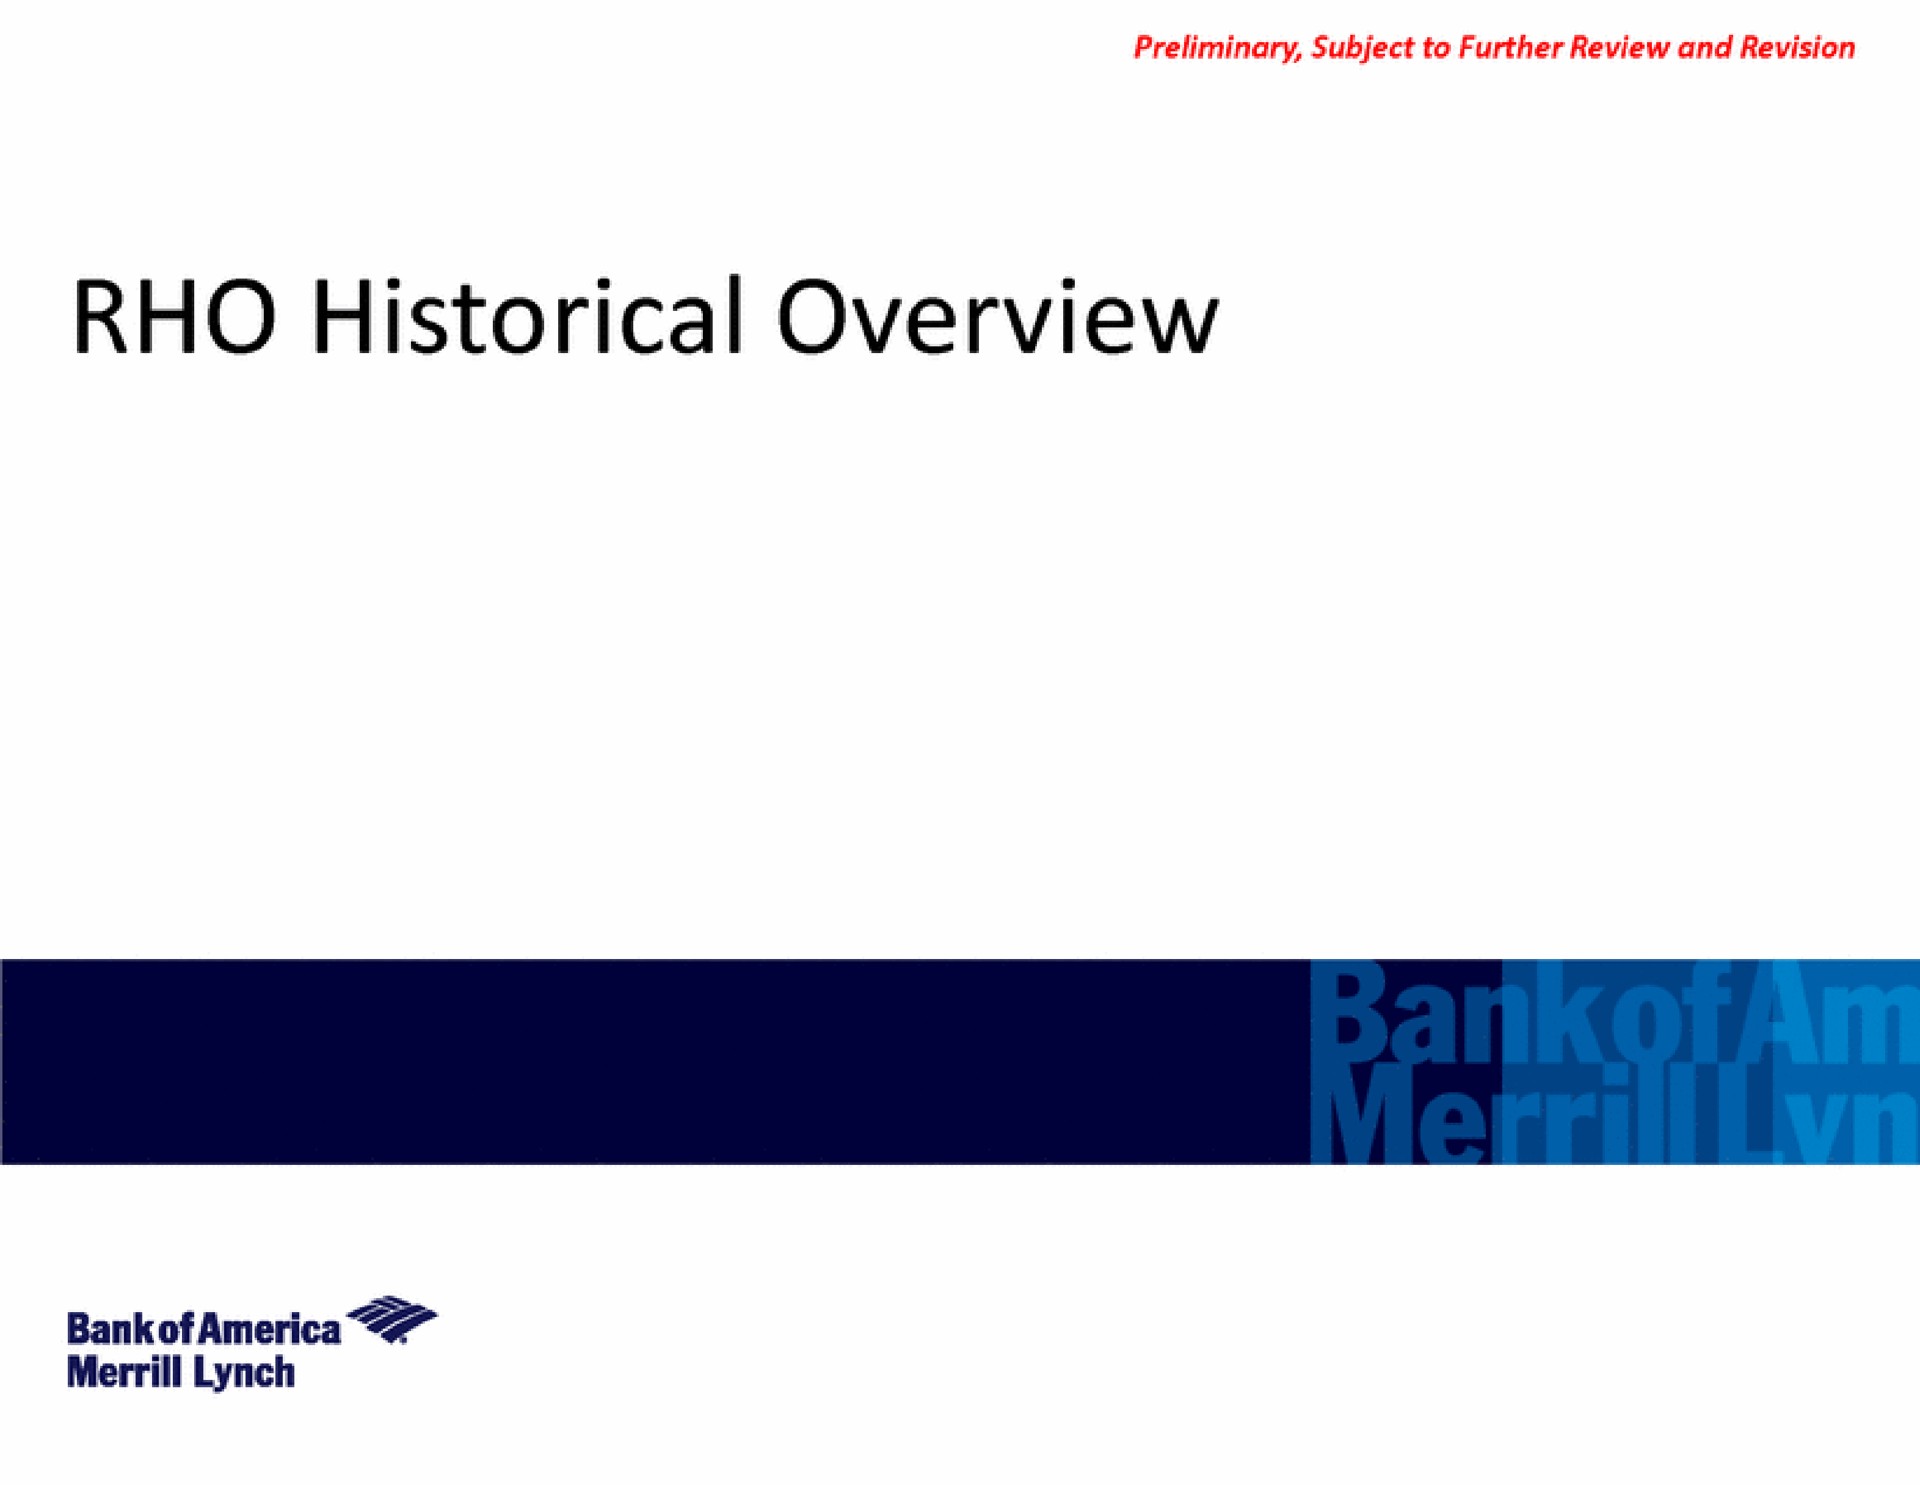 rho historical overview lynch | Bank of America